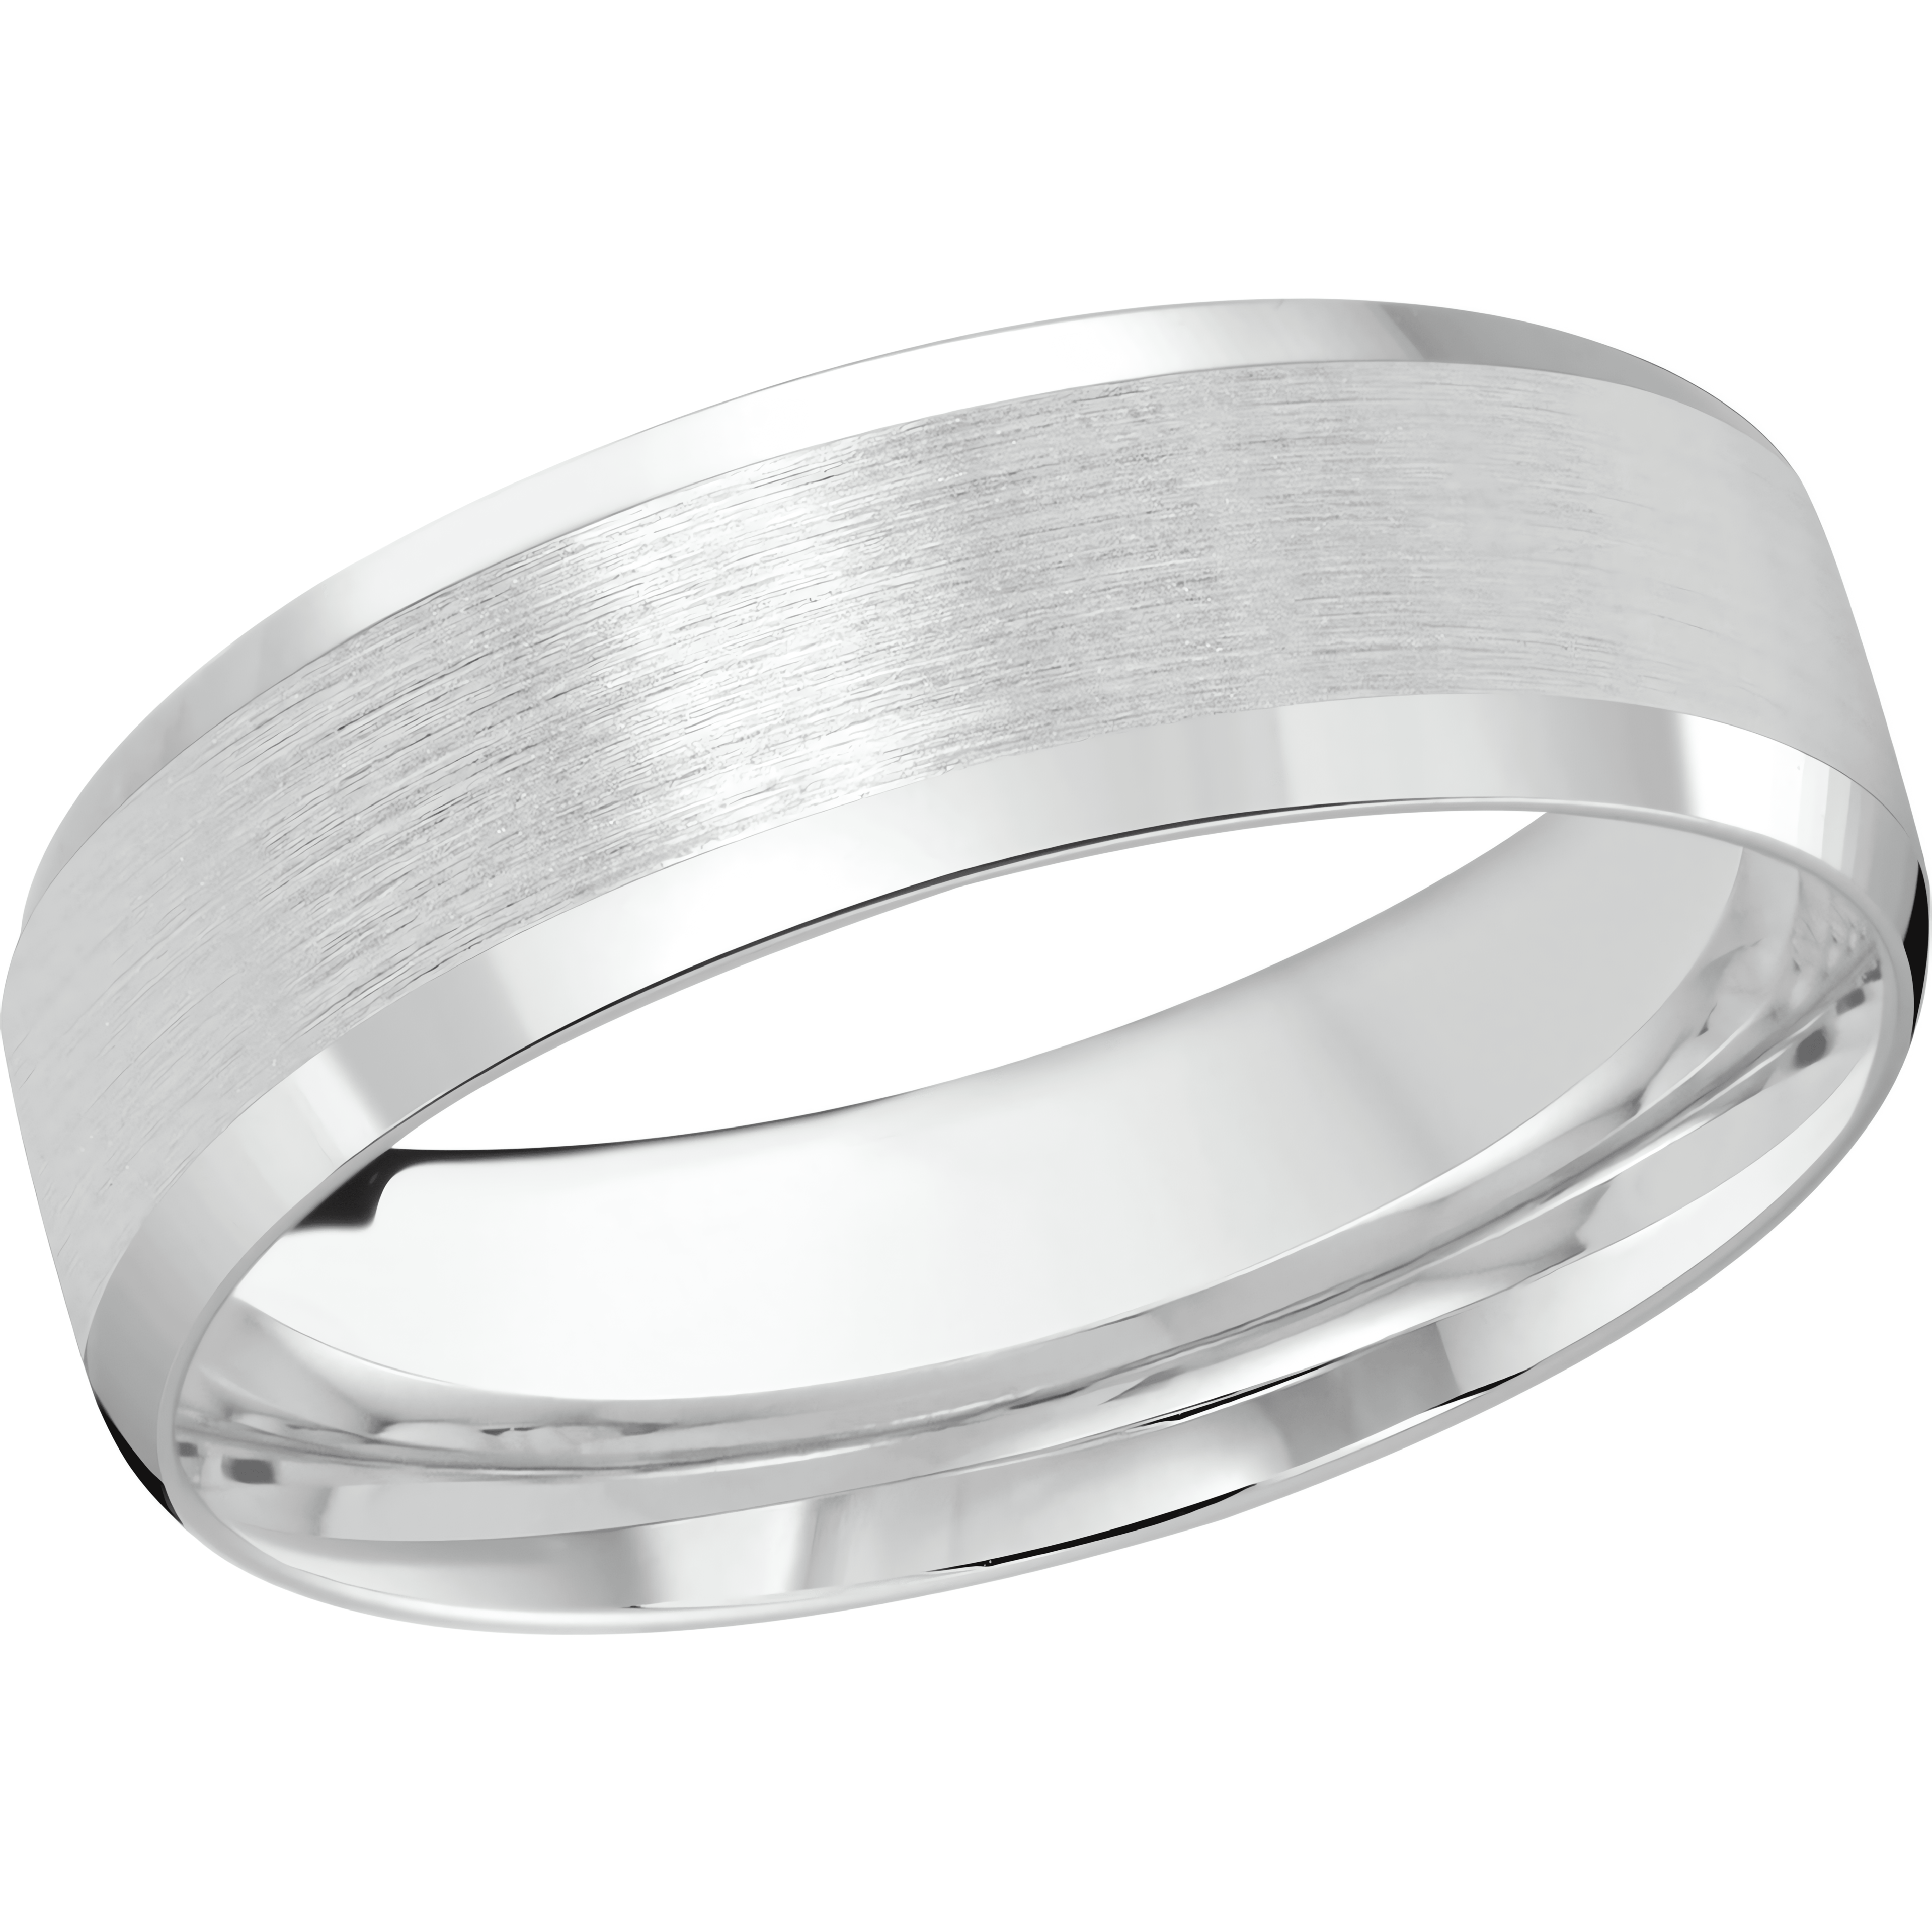 14kt white gold / 7 mm / top